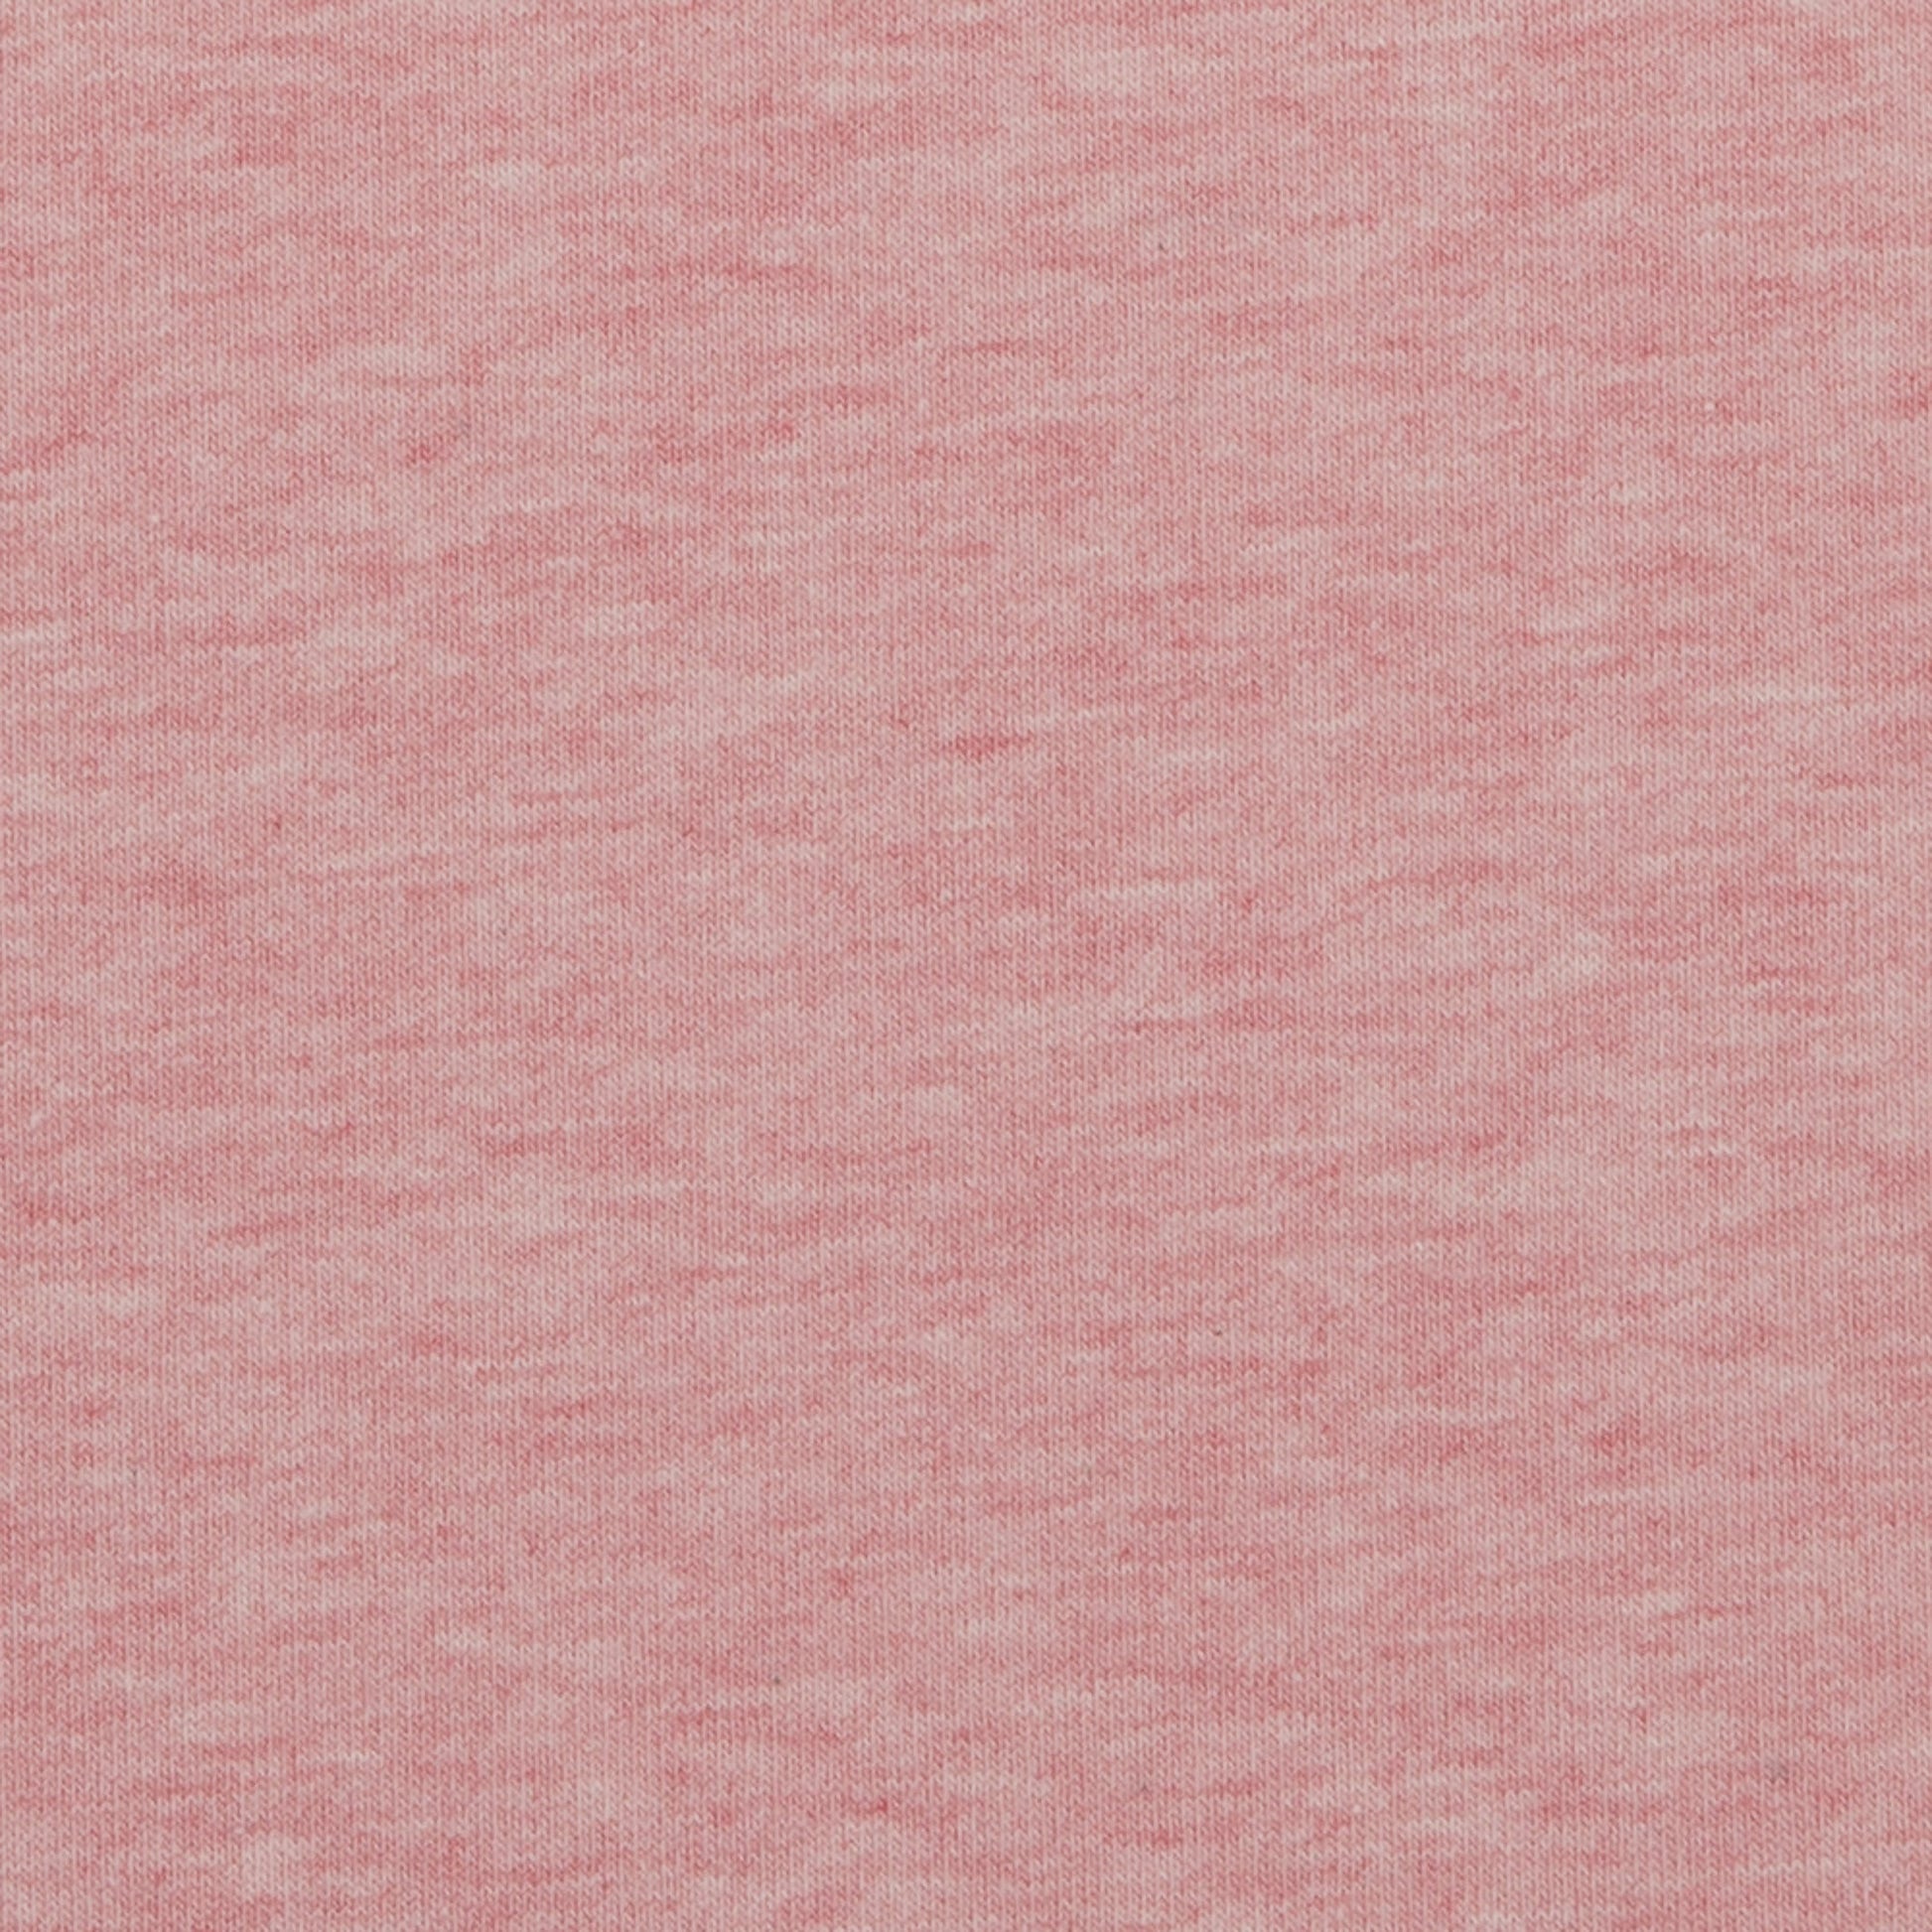 Swafing - Melange - Pink - Euro-ribbing - Jersey - French Terry - Fleeced French Terry - 1432 - Little Rhody Sewing Co.